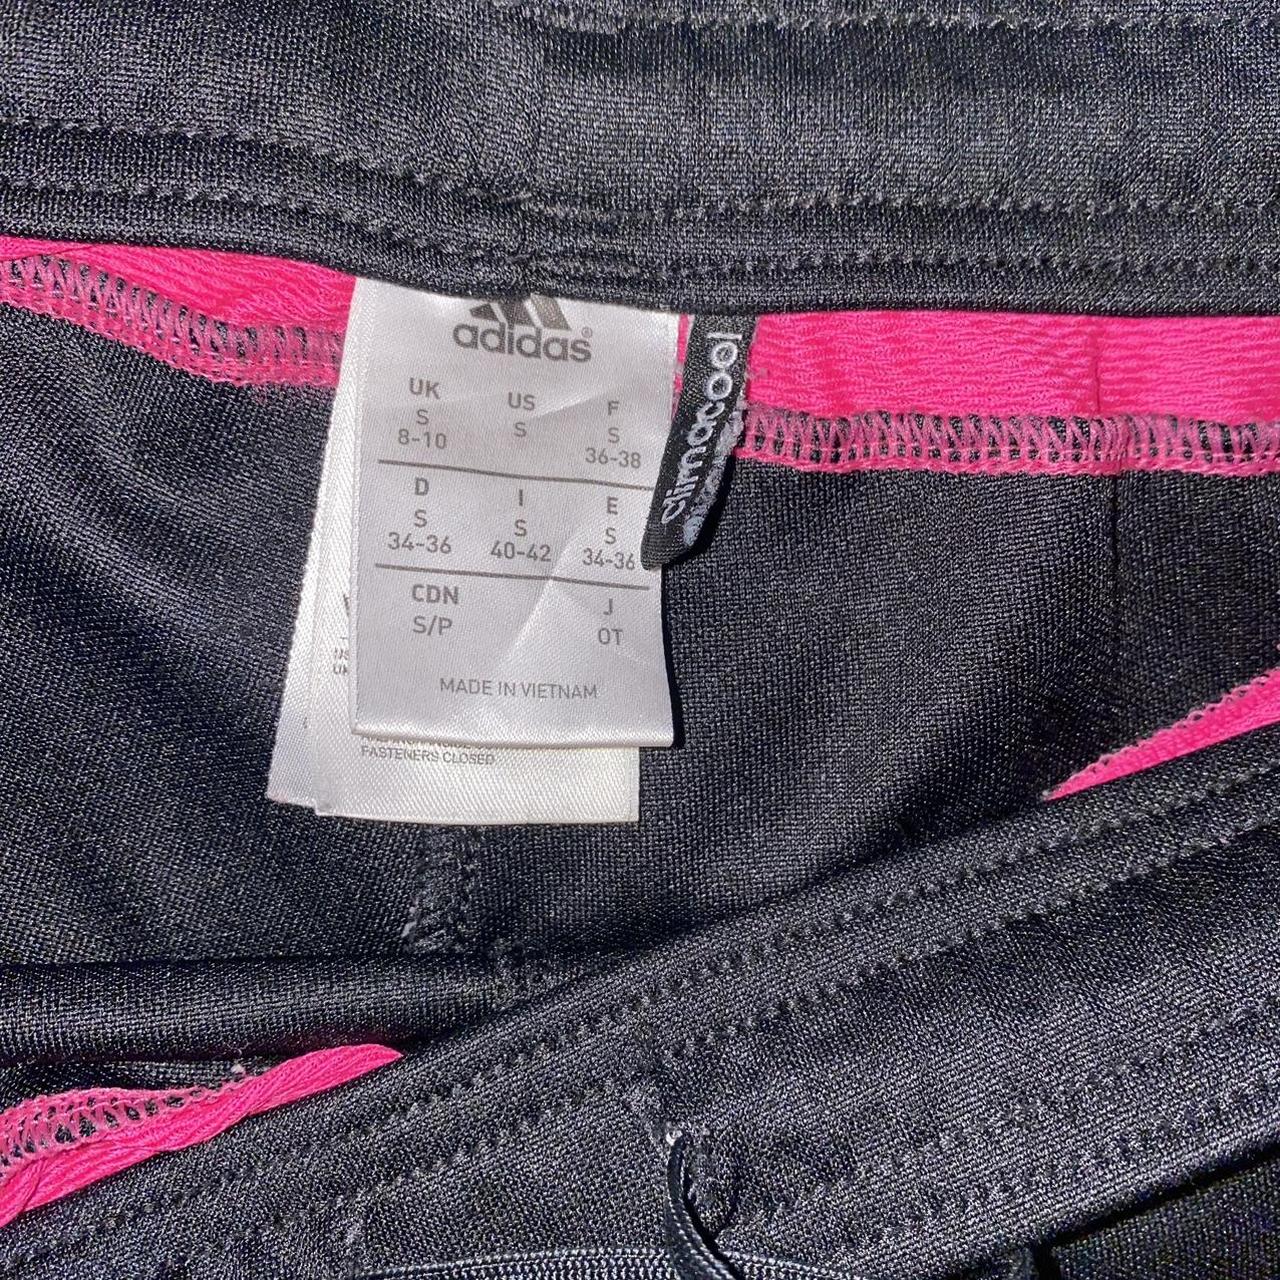 Pink Adidas soccer pants with climacool. Extremely - Depop